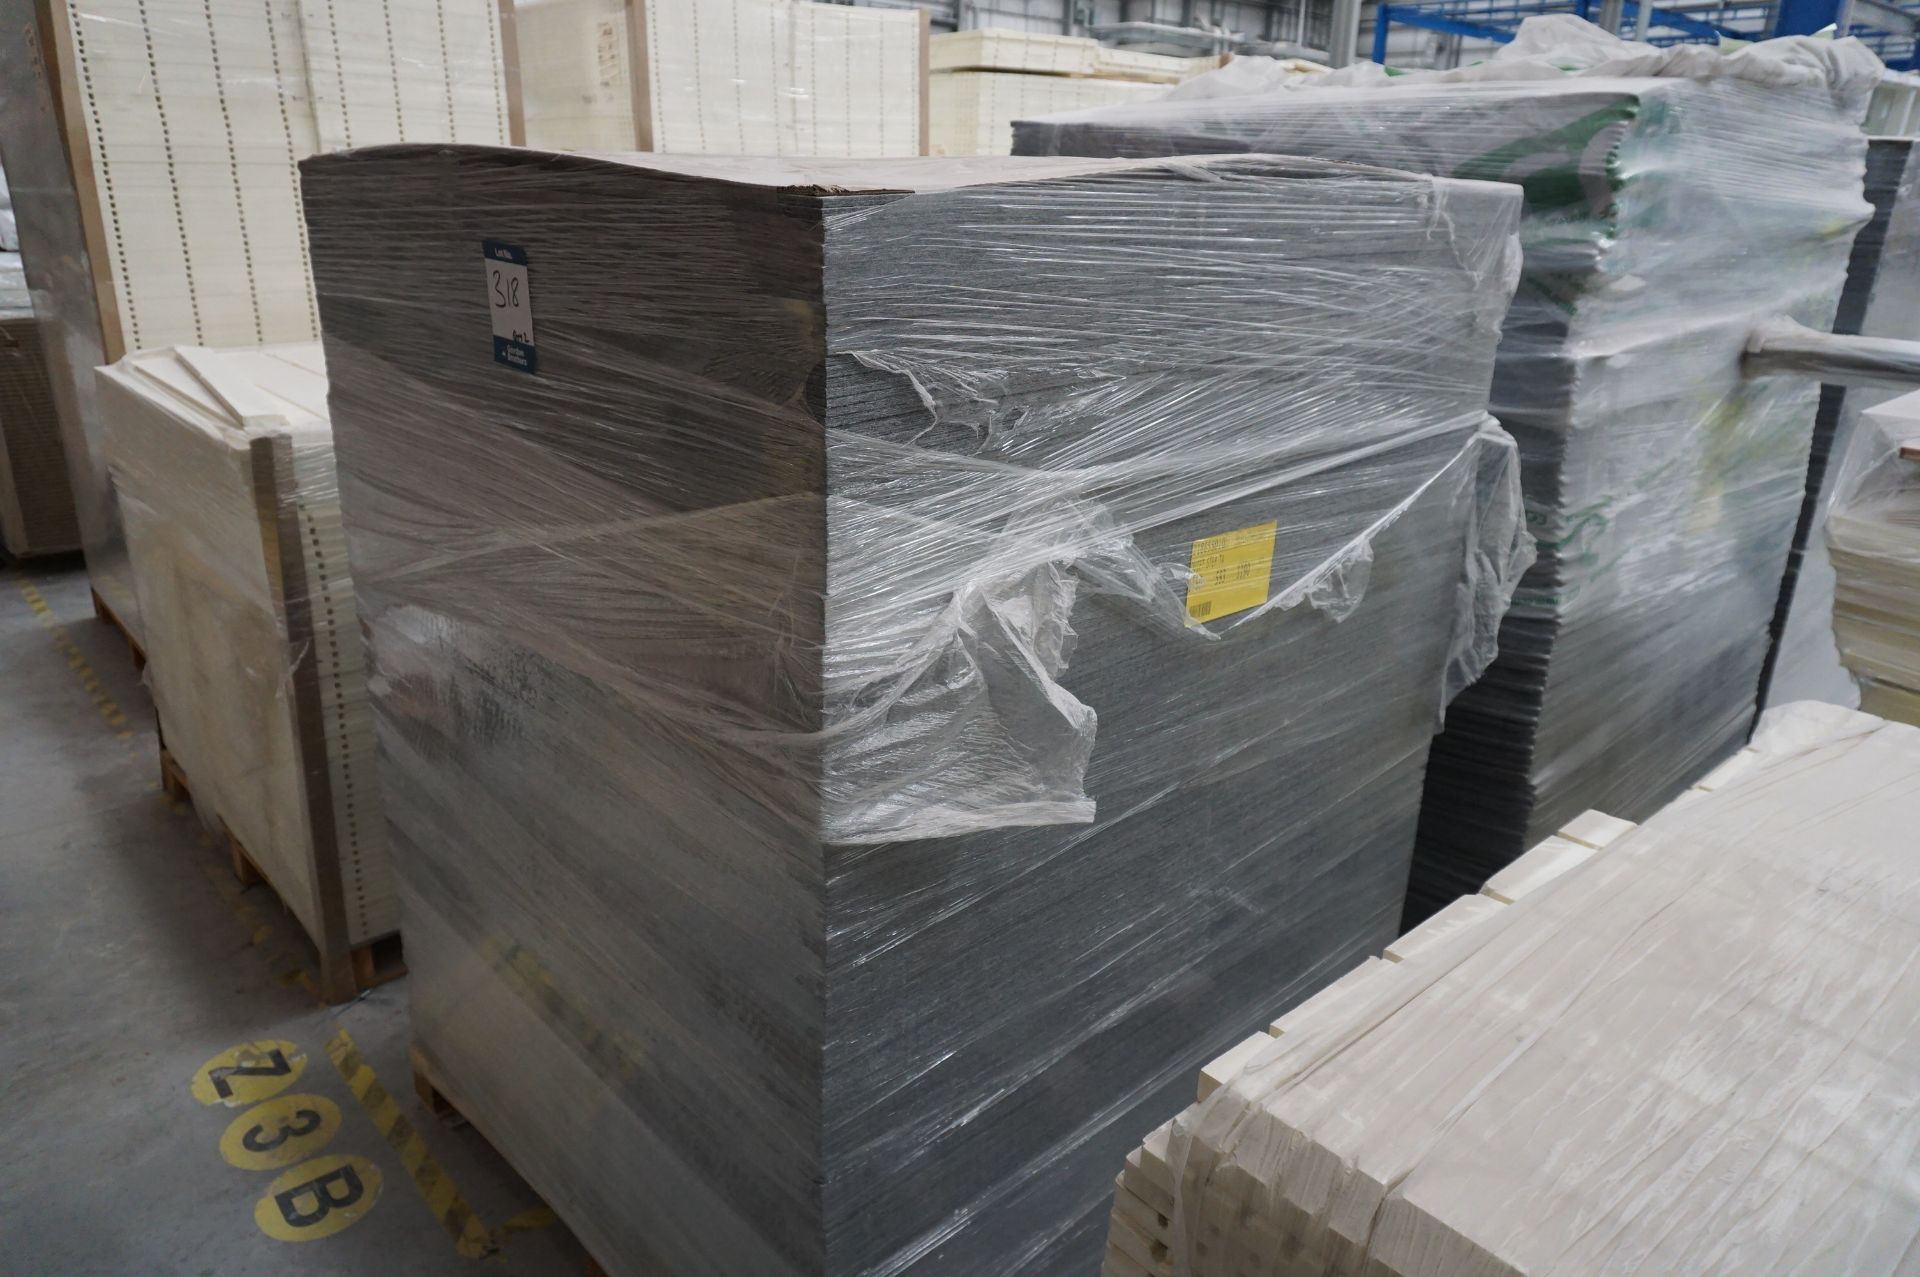 Quiet, Step T4 floor insulation on two pallets, approx. 700 sheets, 1190 x 593mm - Image 9 of 12